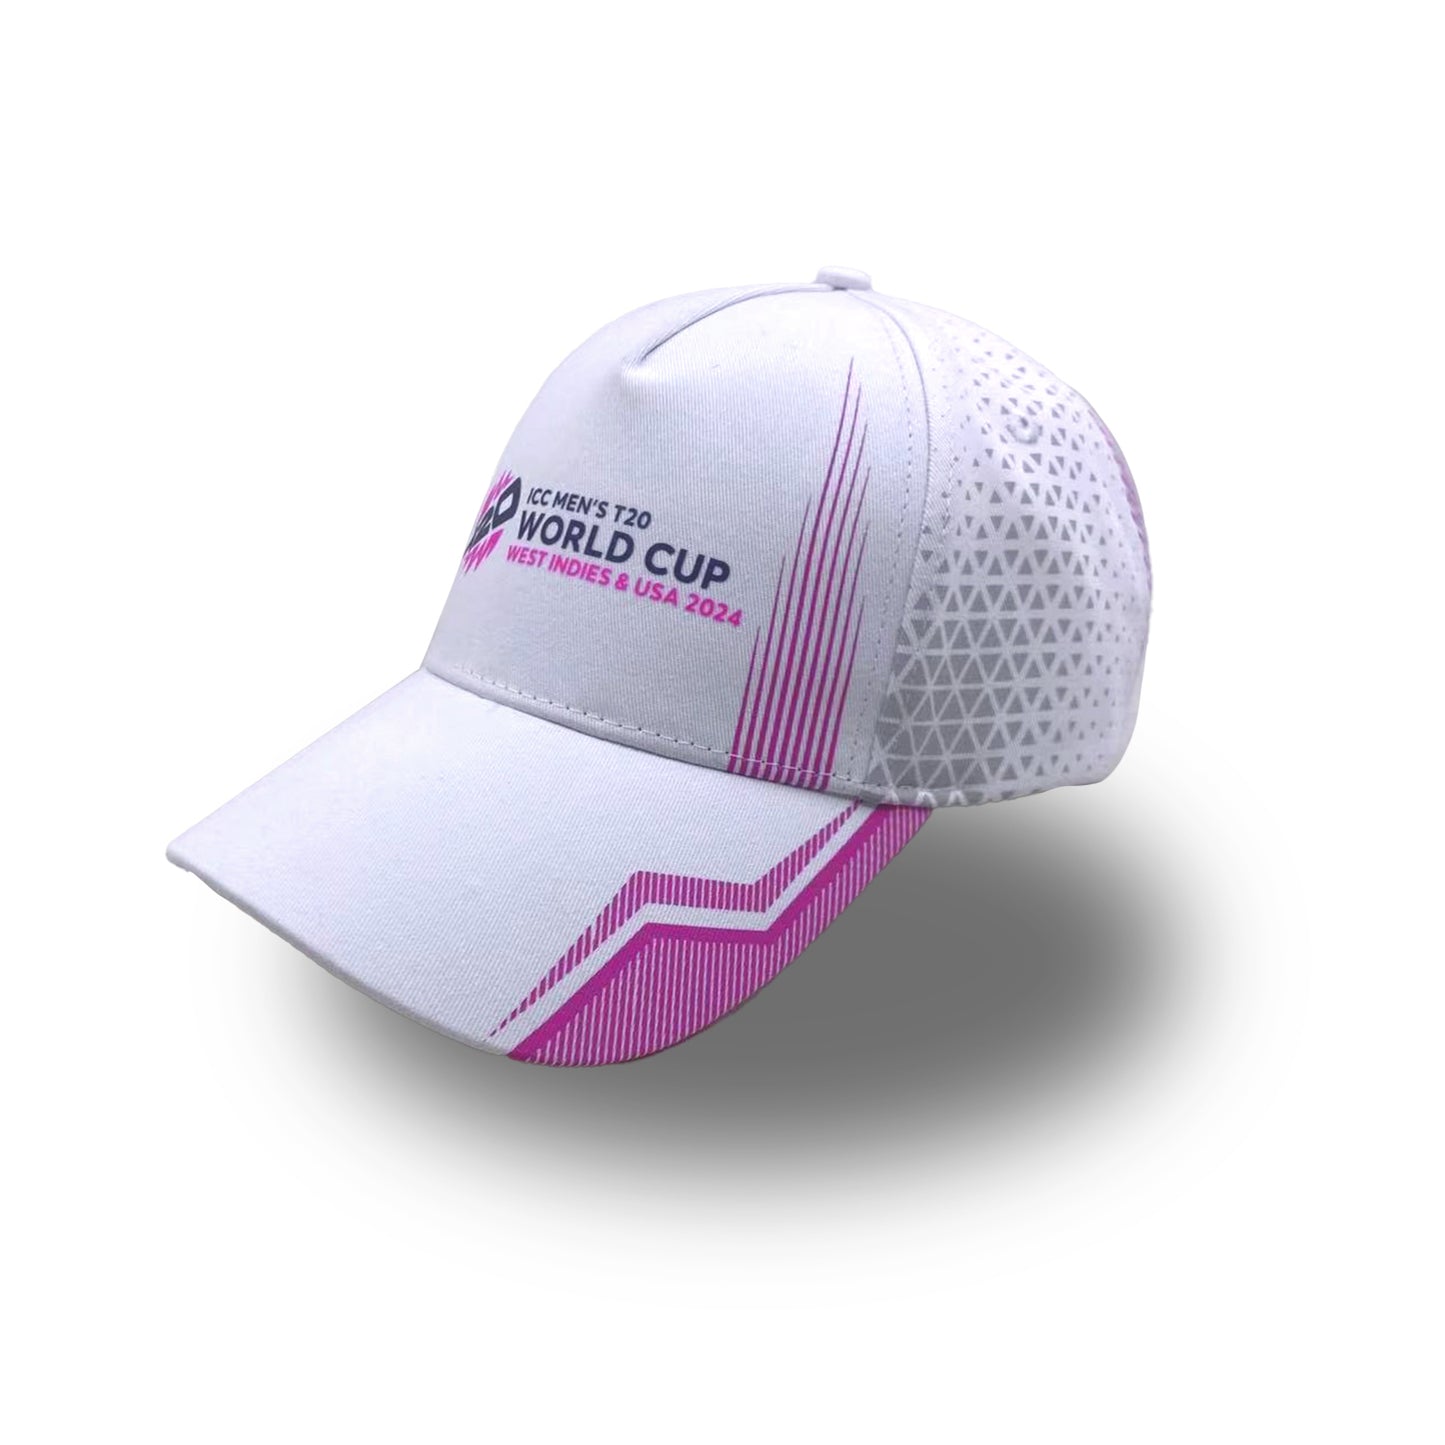 ICC T20 World Cup White Sport Cap -  West Indies & USA 2024 Edition